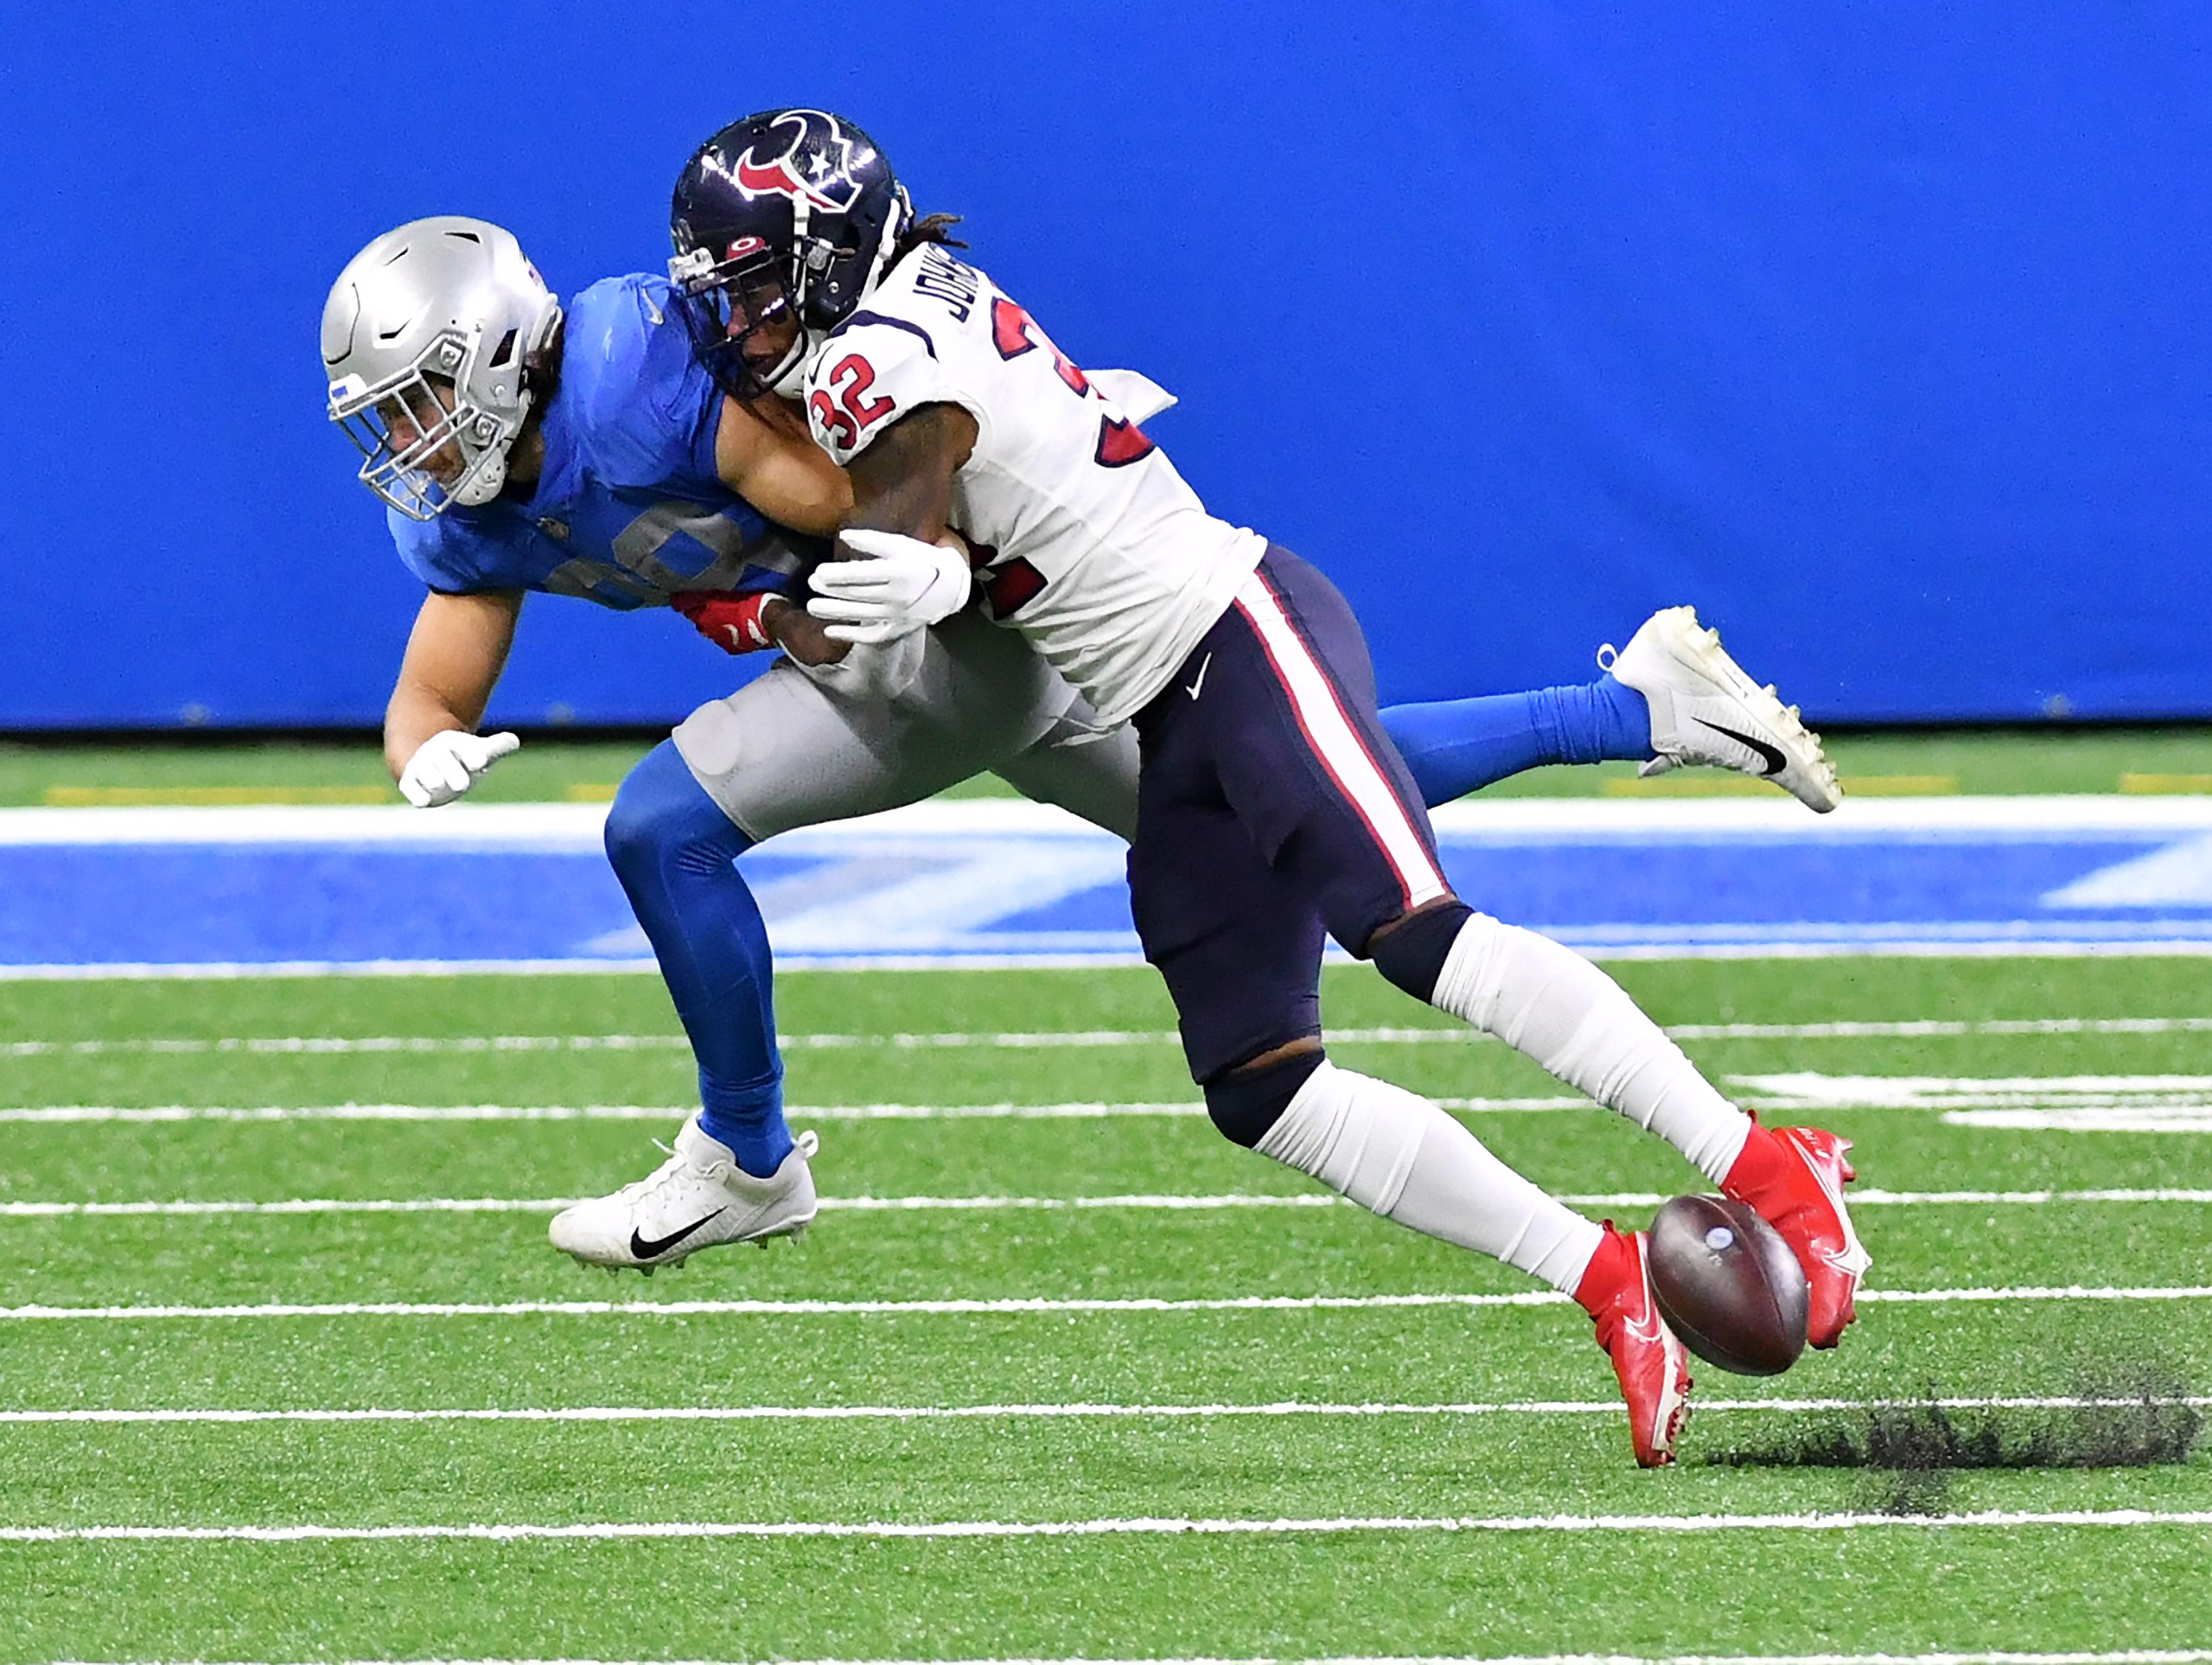 Texans cornerback Lonnie Johnson (32) defends on this incomplete pass to Lions tight end T.J. Hockenson (88) in the fourth quarter.